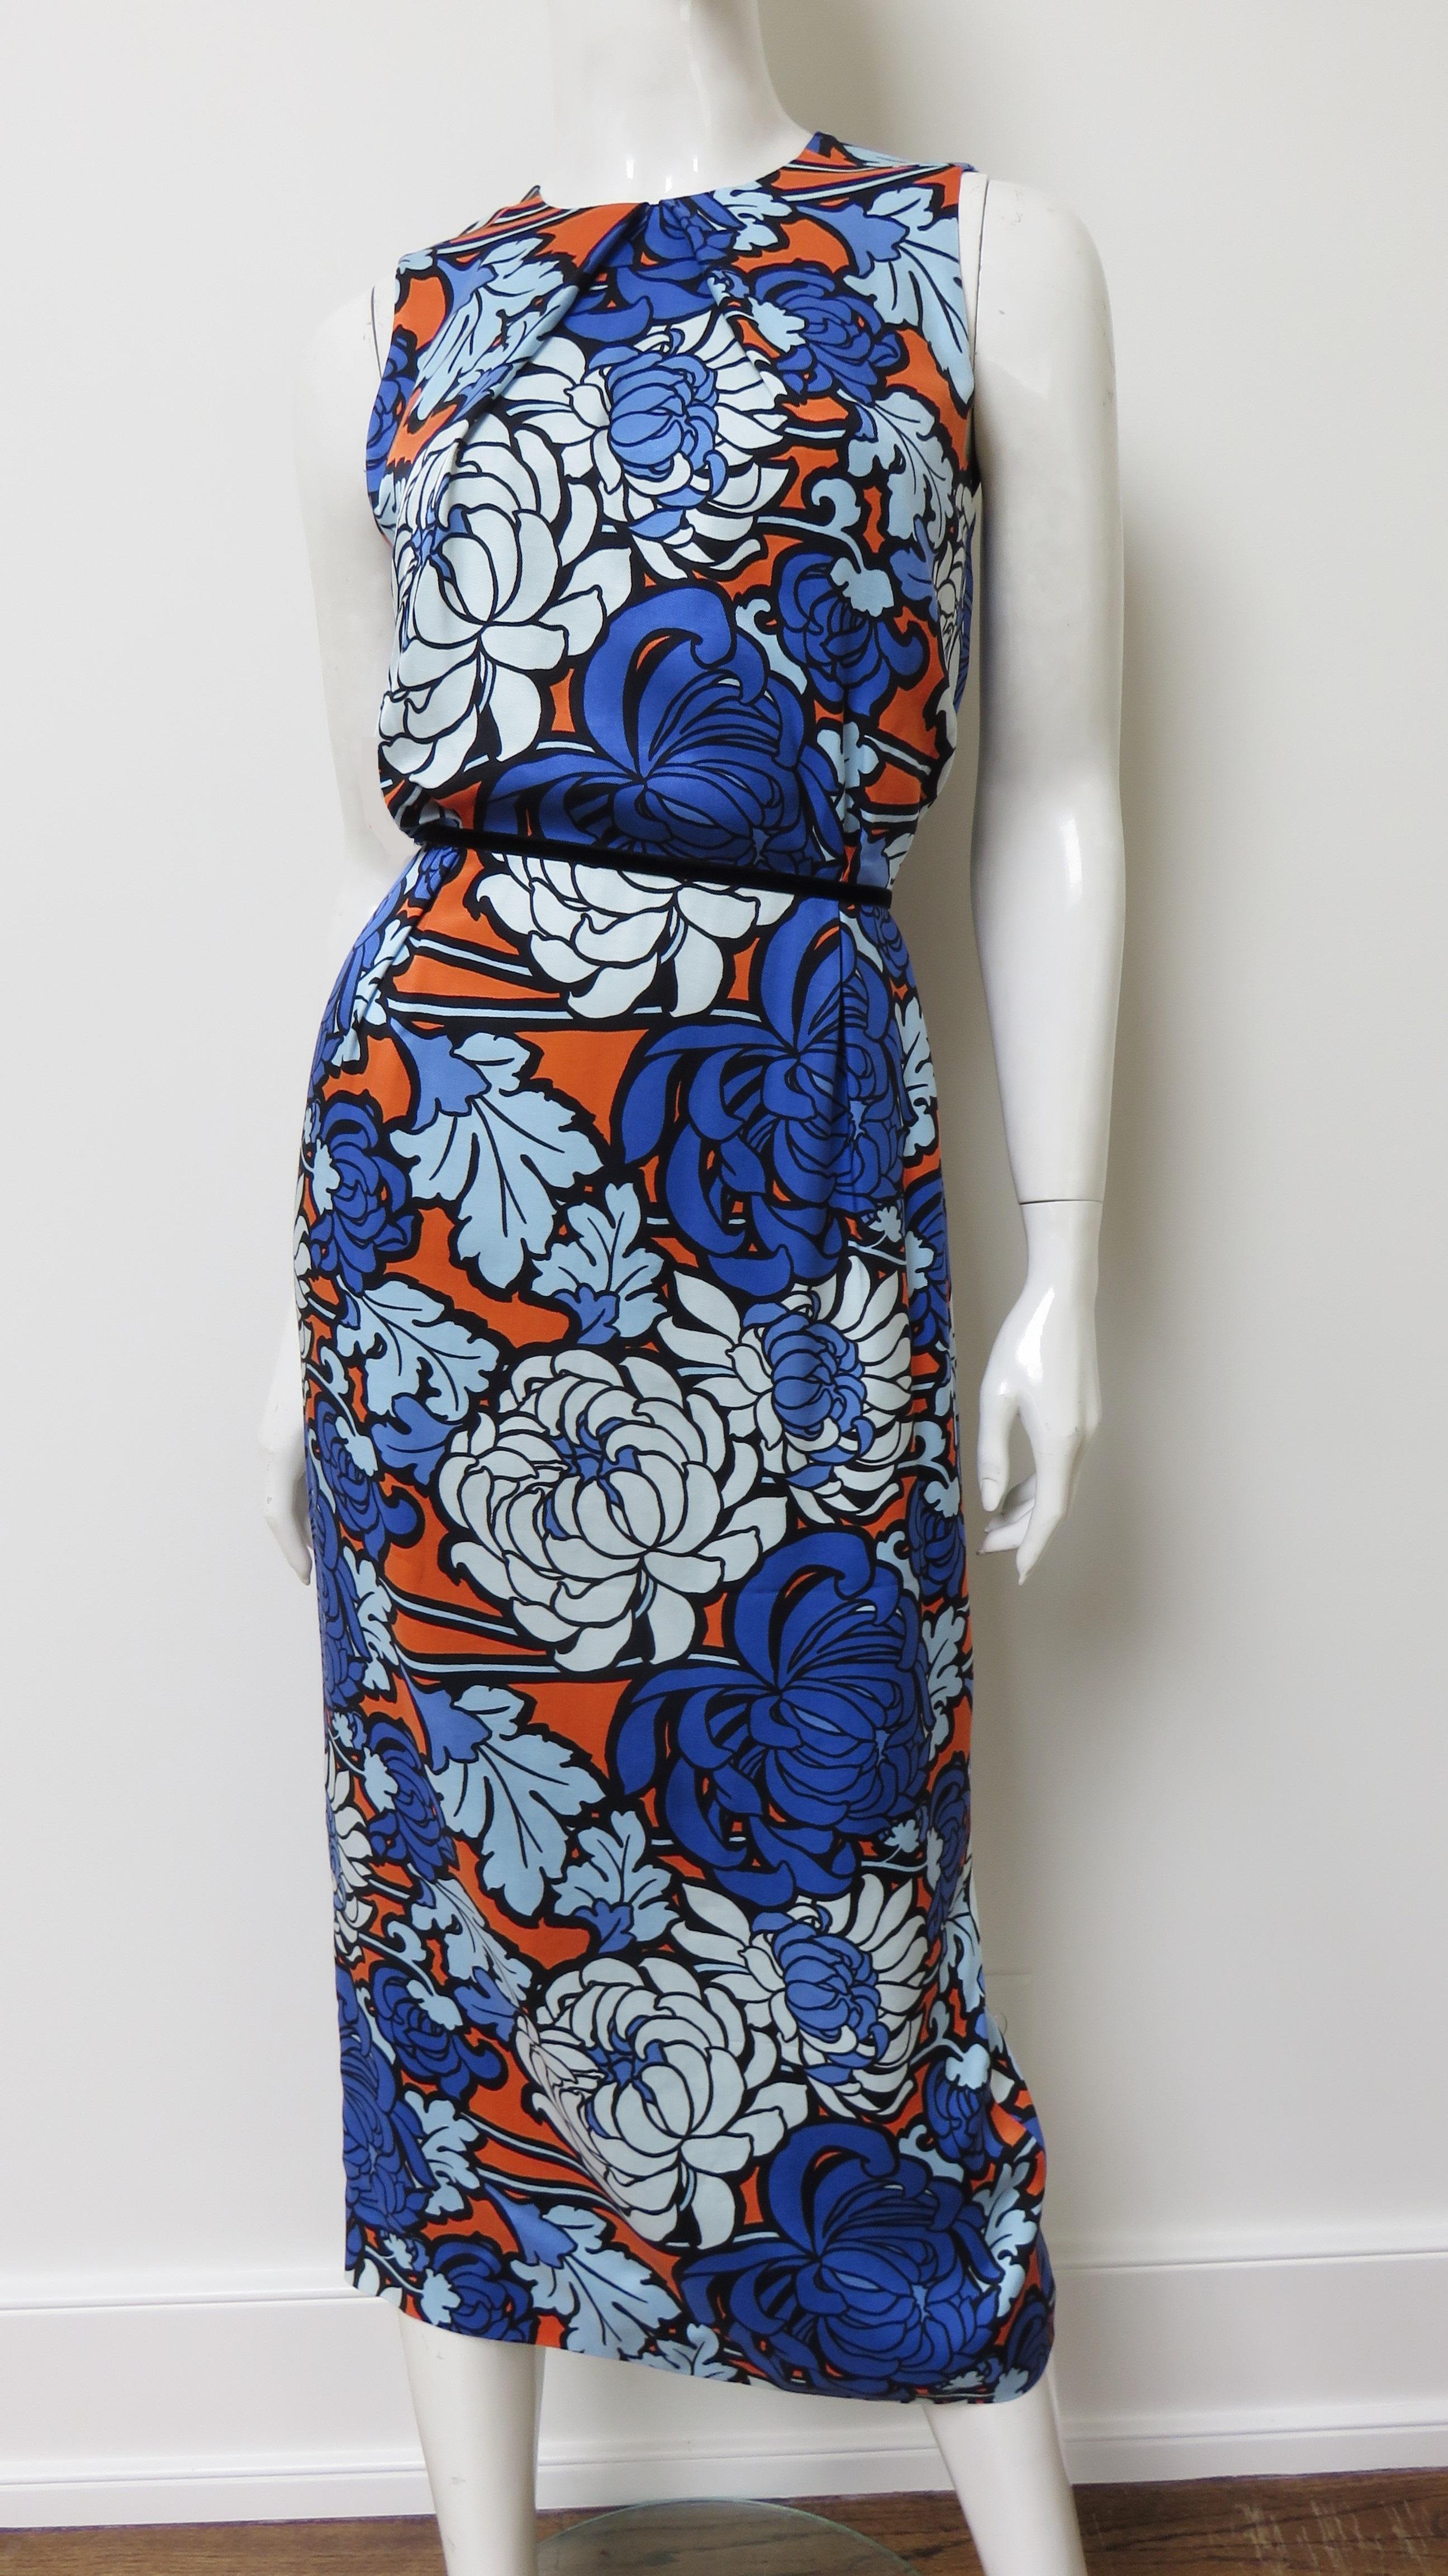 A fabulous chrysanthemum print silk dress in shades of blue and orange.  It is sleeveless with a crew neckline and a midi length straight skirt with a back kick pleat. The dress is fully lined in silk and has back zipper.
Fits sizes Small,